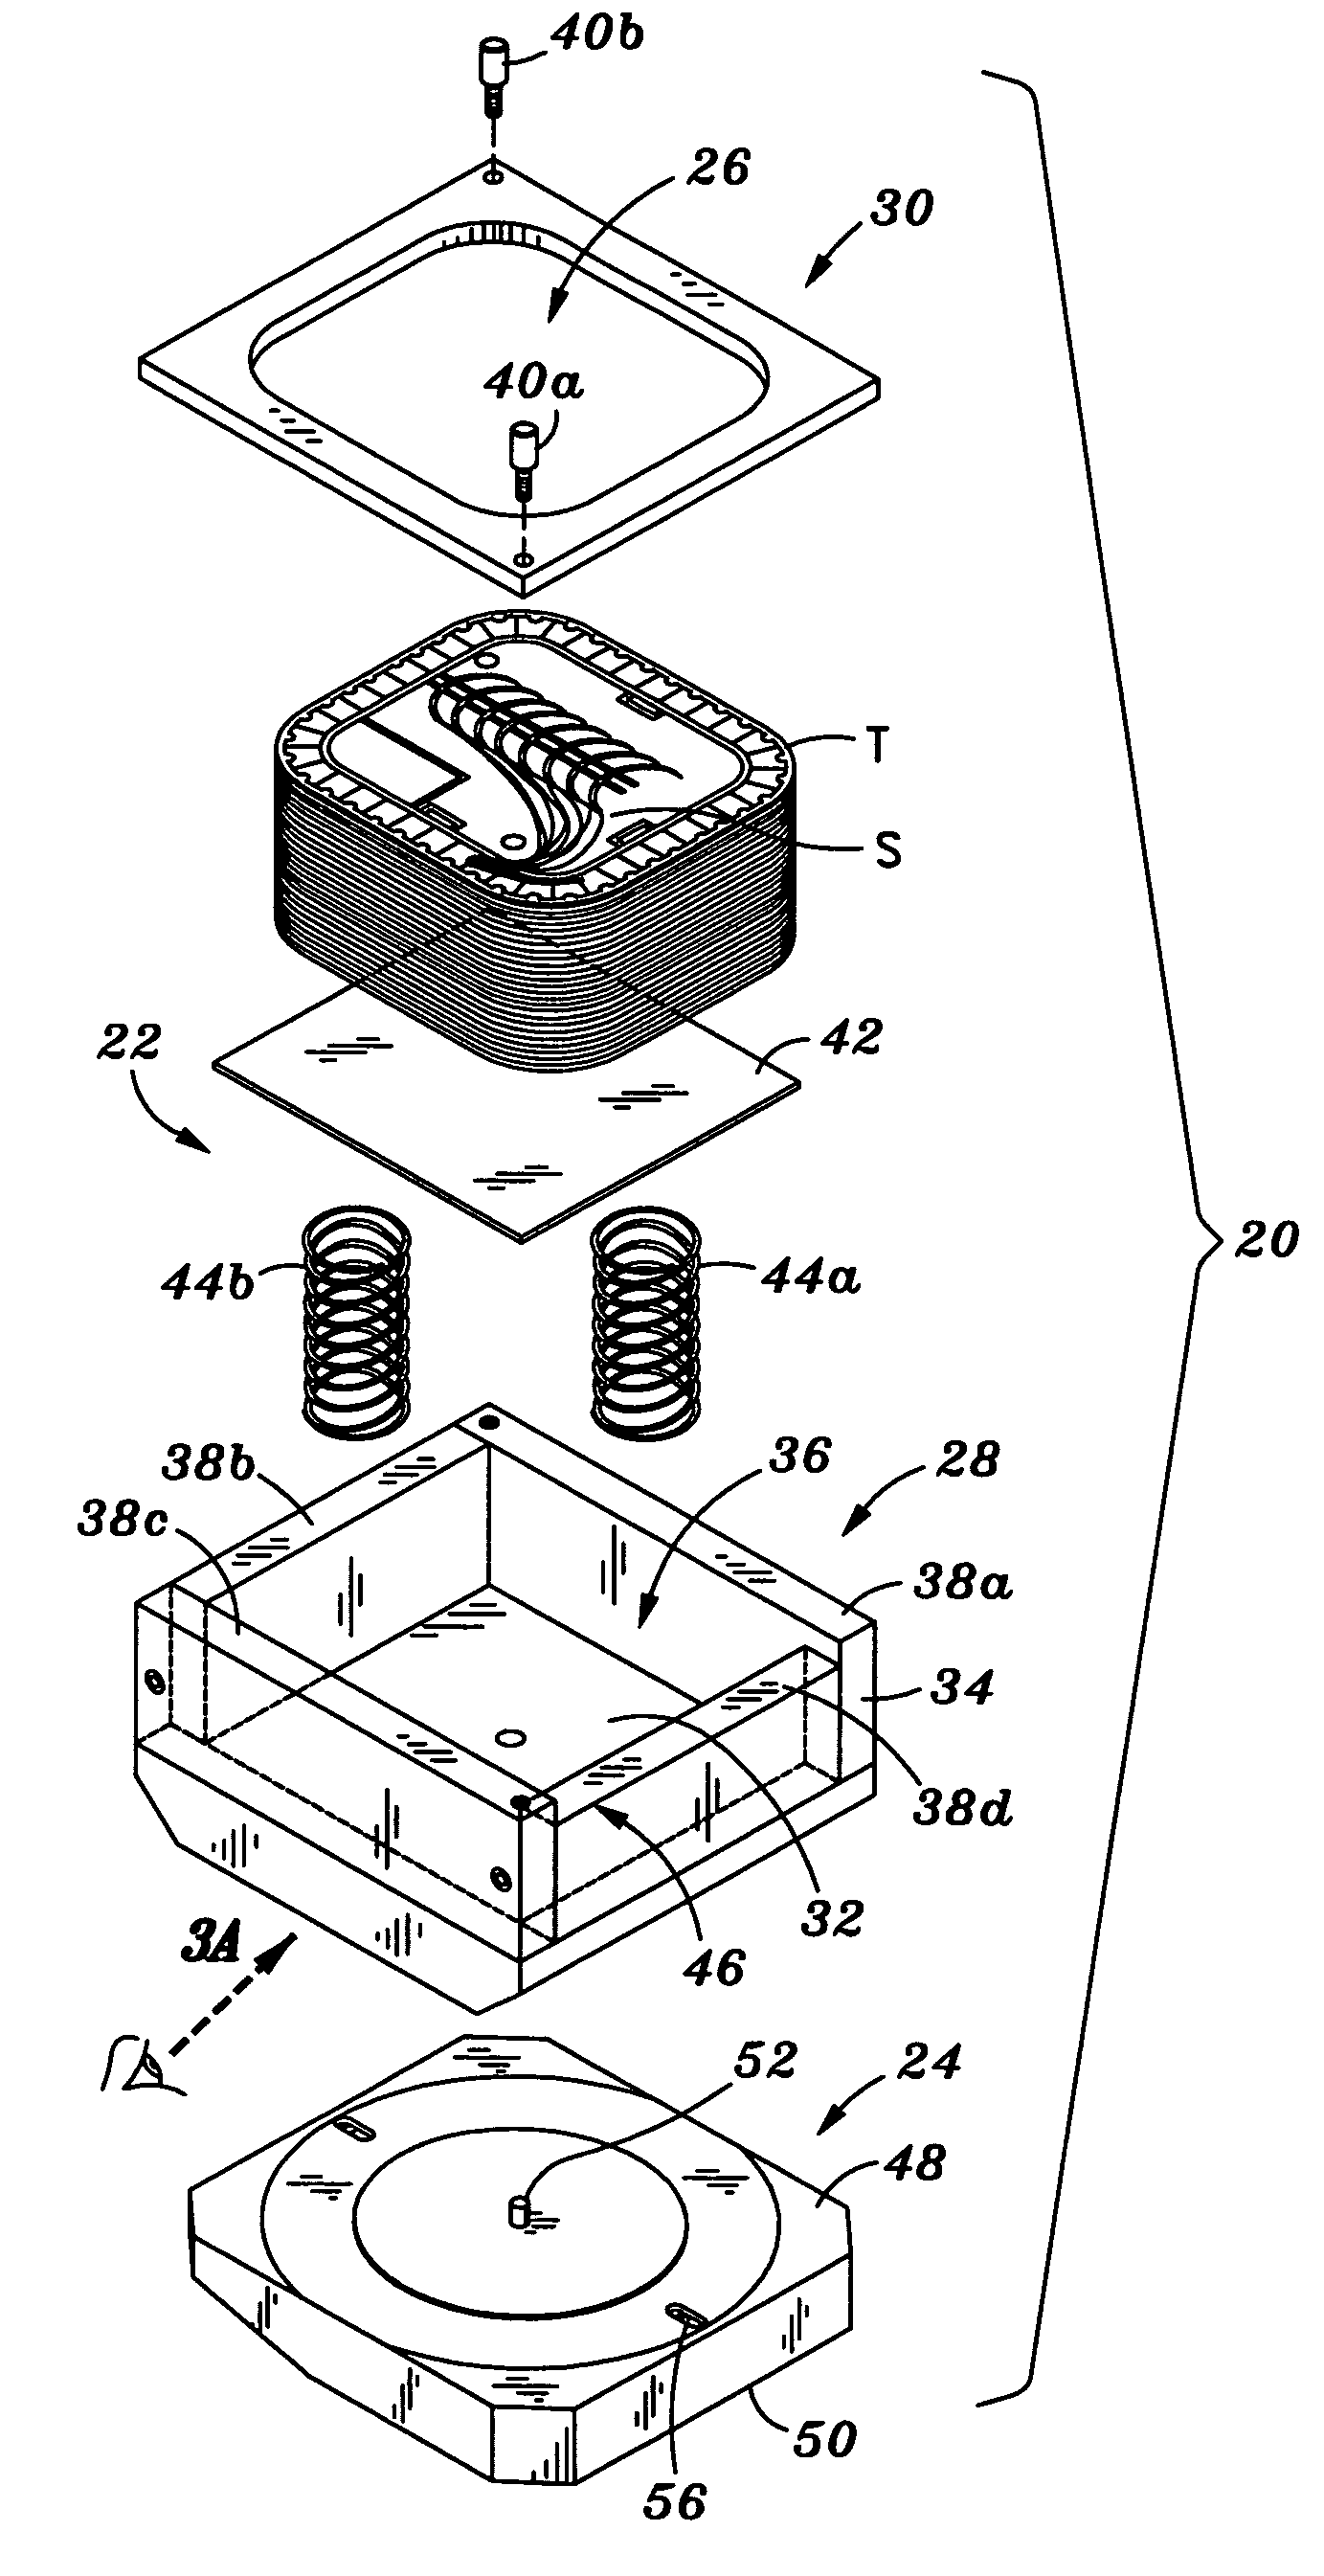 Method of retaining suture packages for the dispensing of sutures there from